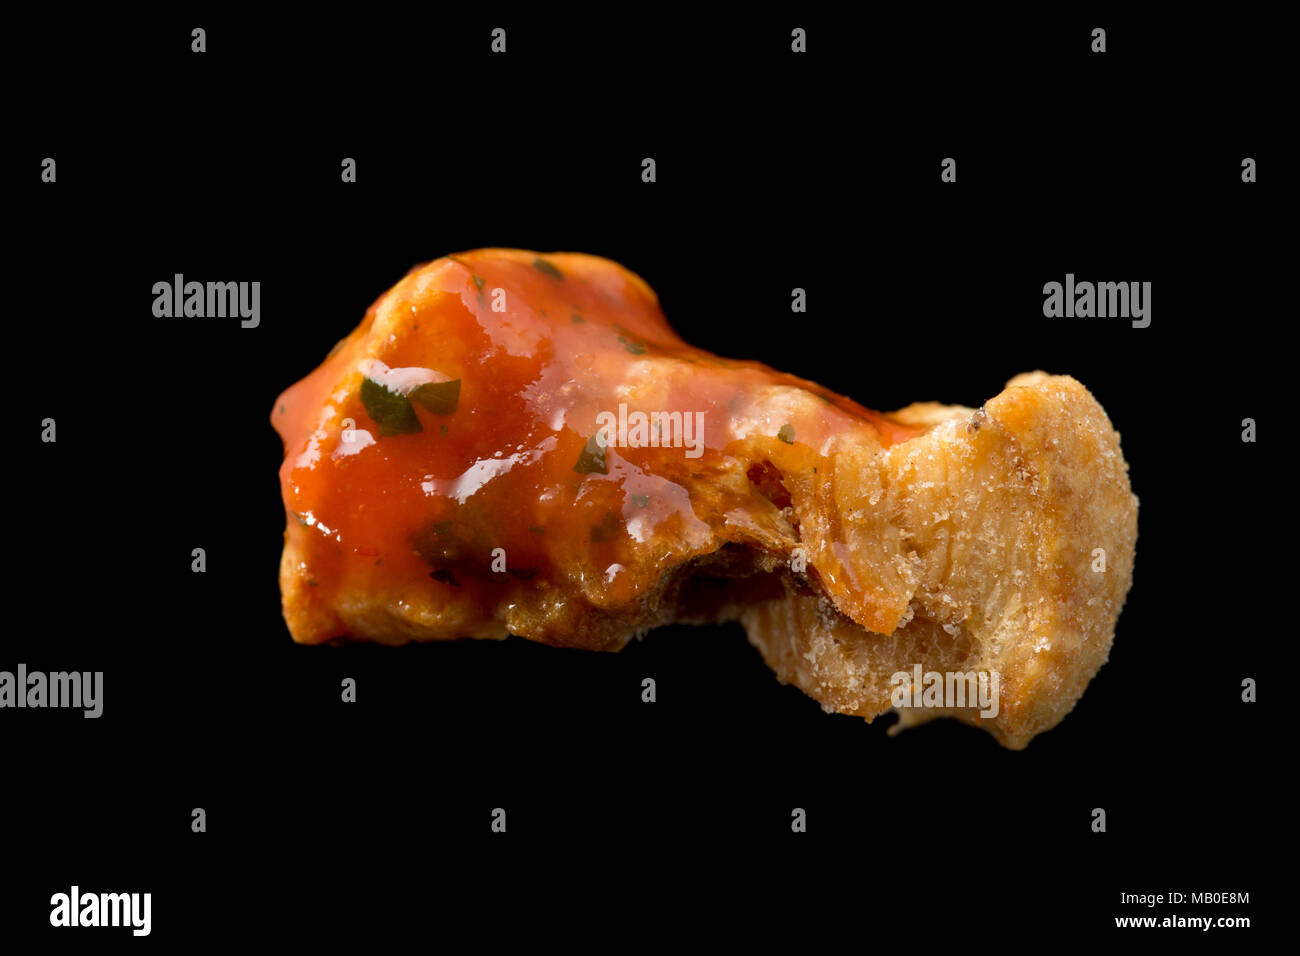 A pork scratching from a packet bought in a supermarket dipped in tomato and chilli salsa. UK Stock Photo